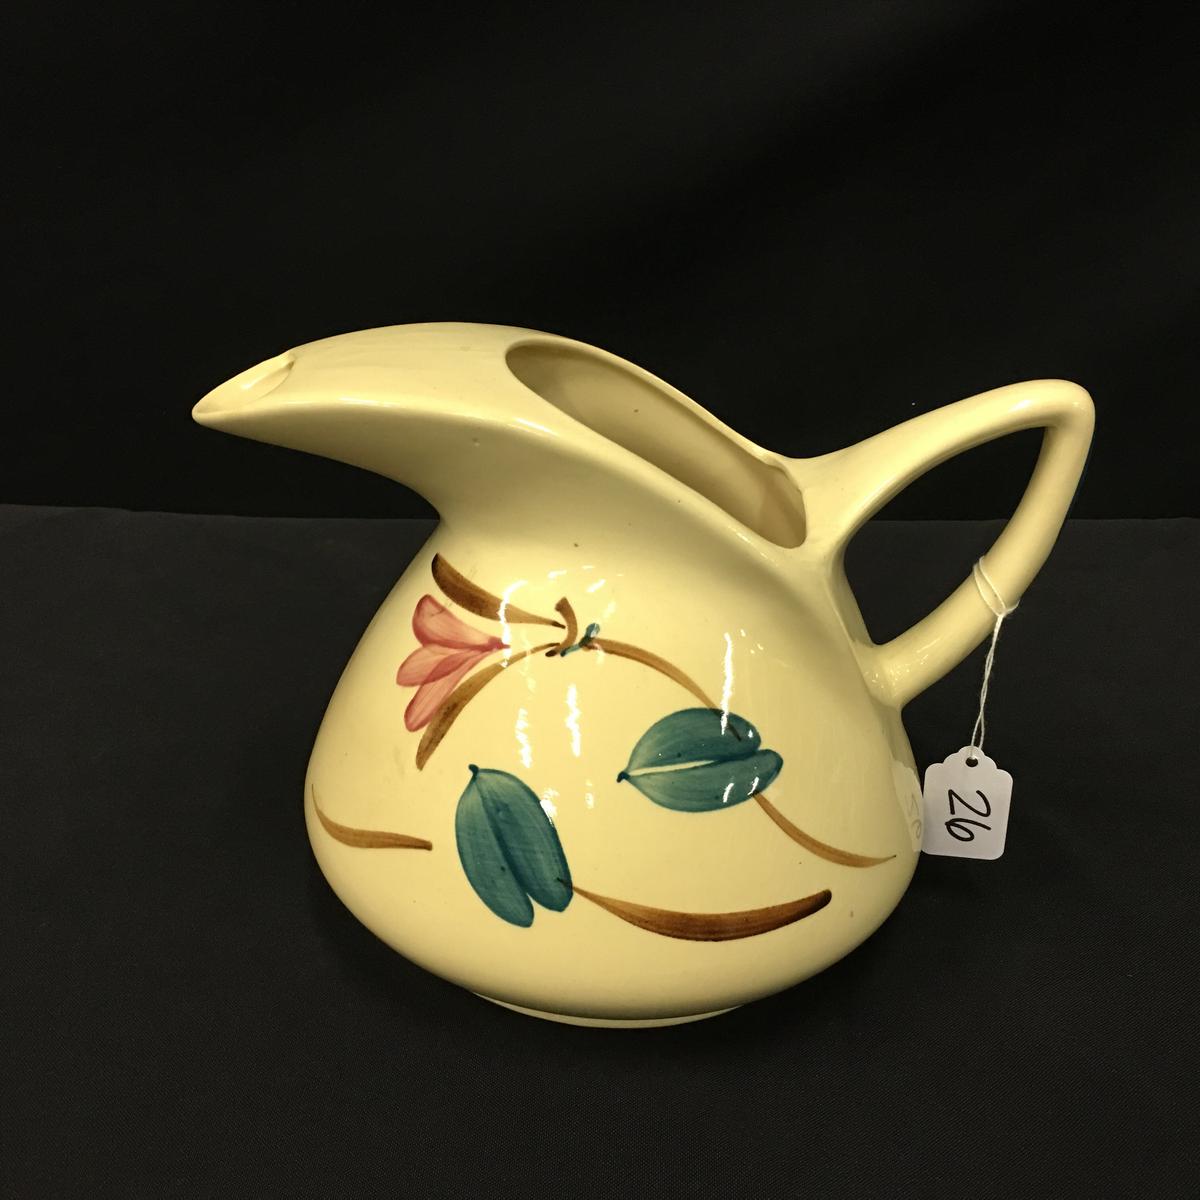 Vintage Hand Painted Pitcher Is 7.5" Tall